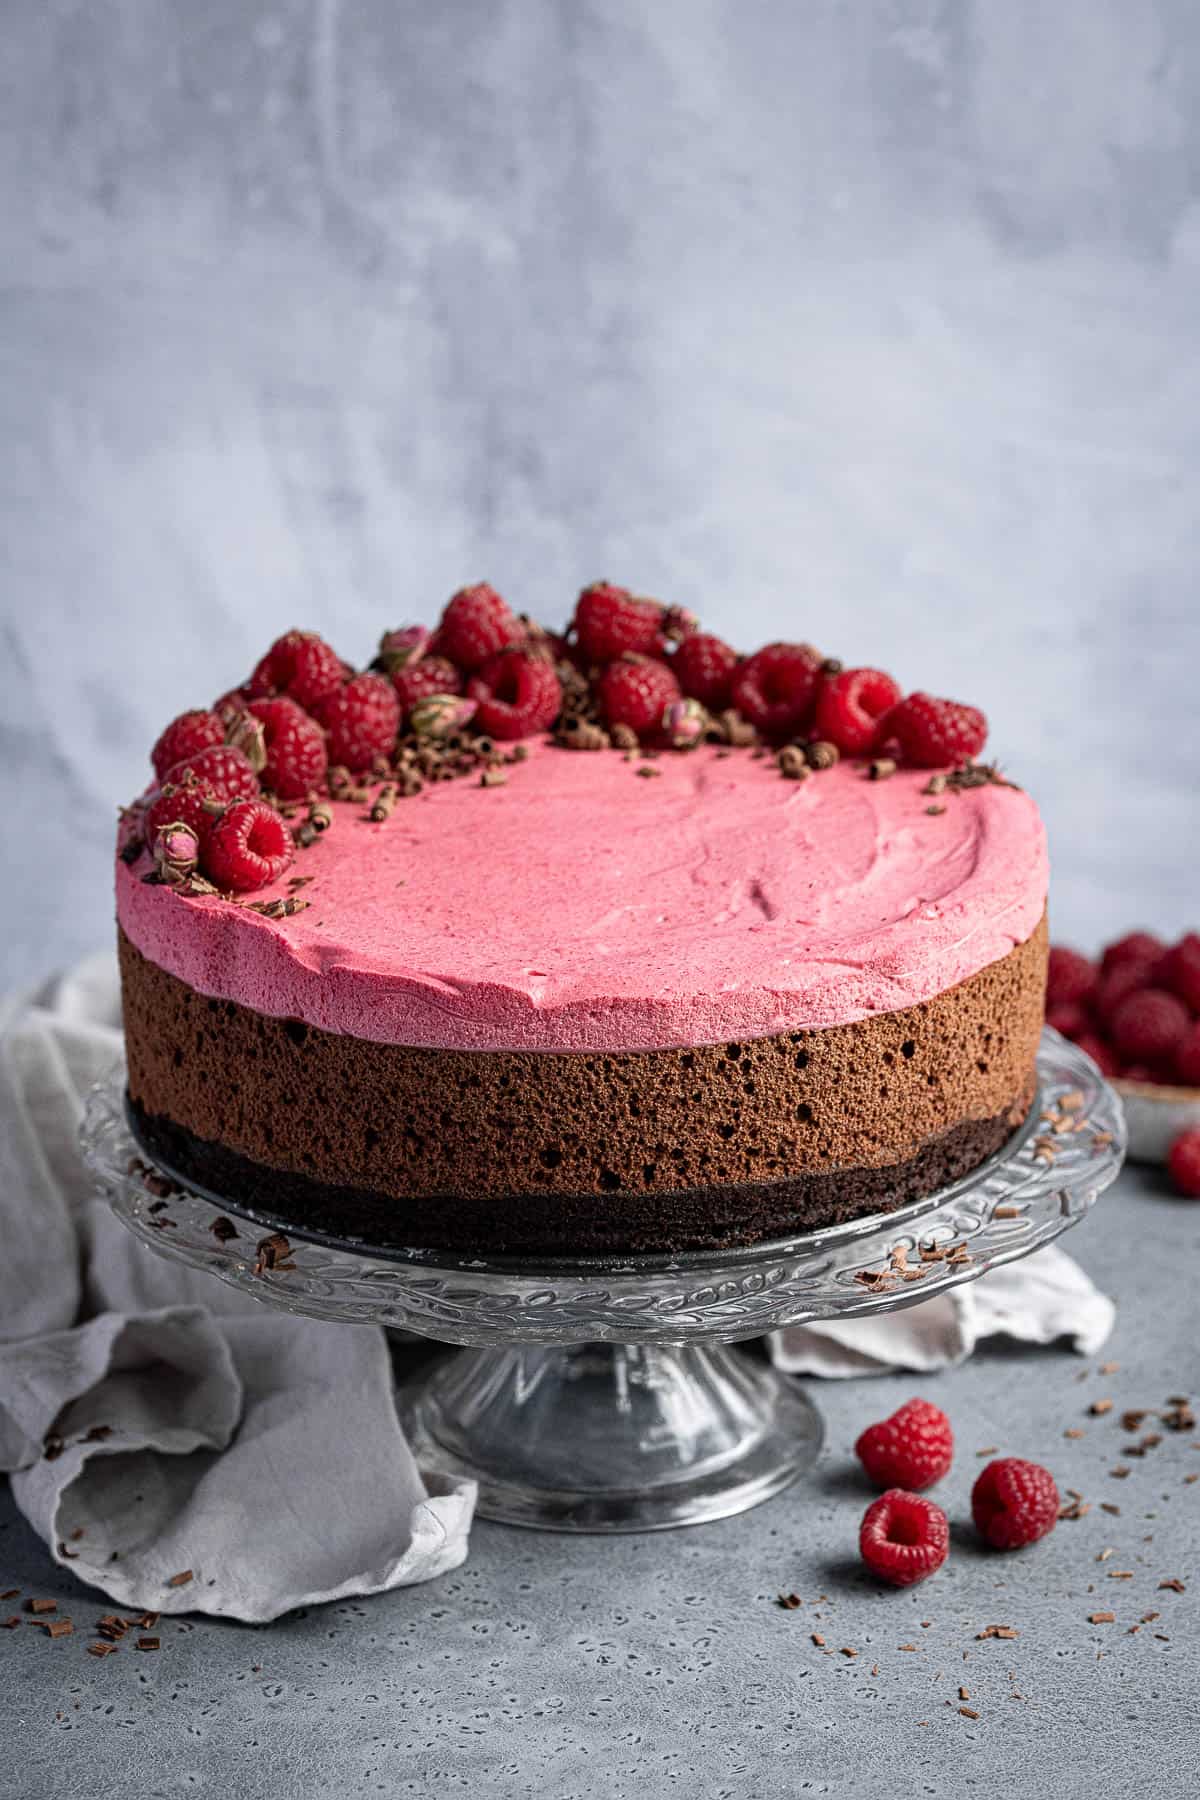 Vegan chocolate raspberry mousse cake on a glass cake stand with a grey cloth and fresh raspberries.